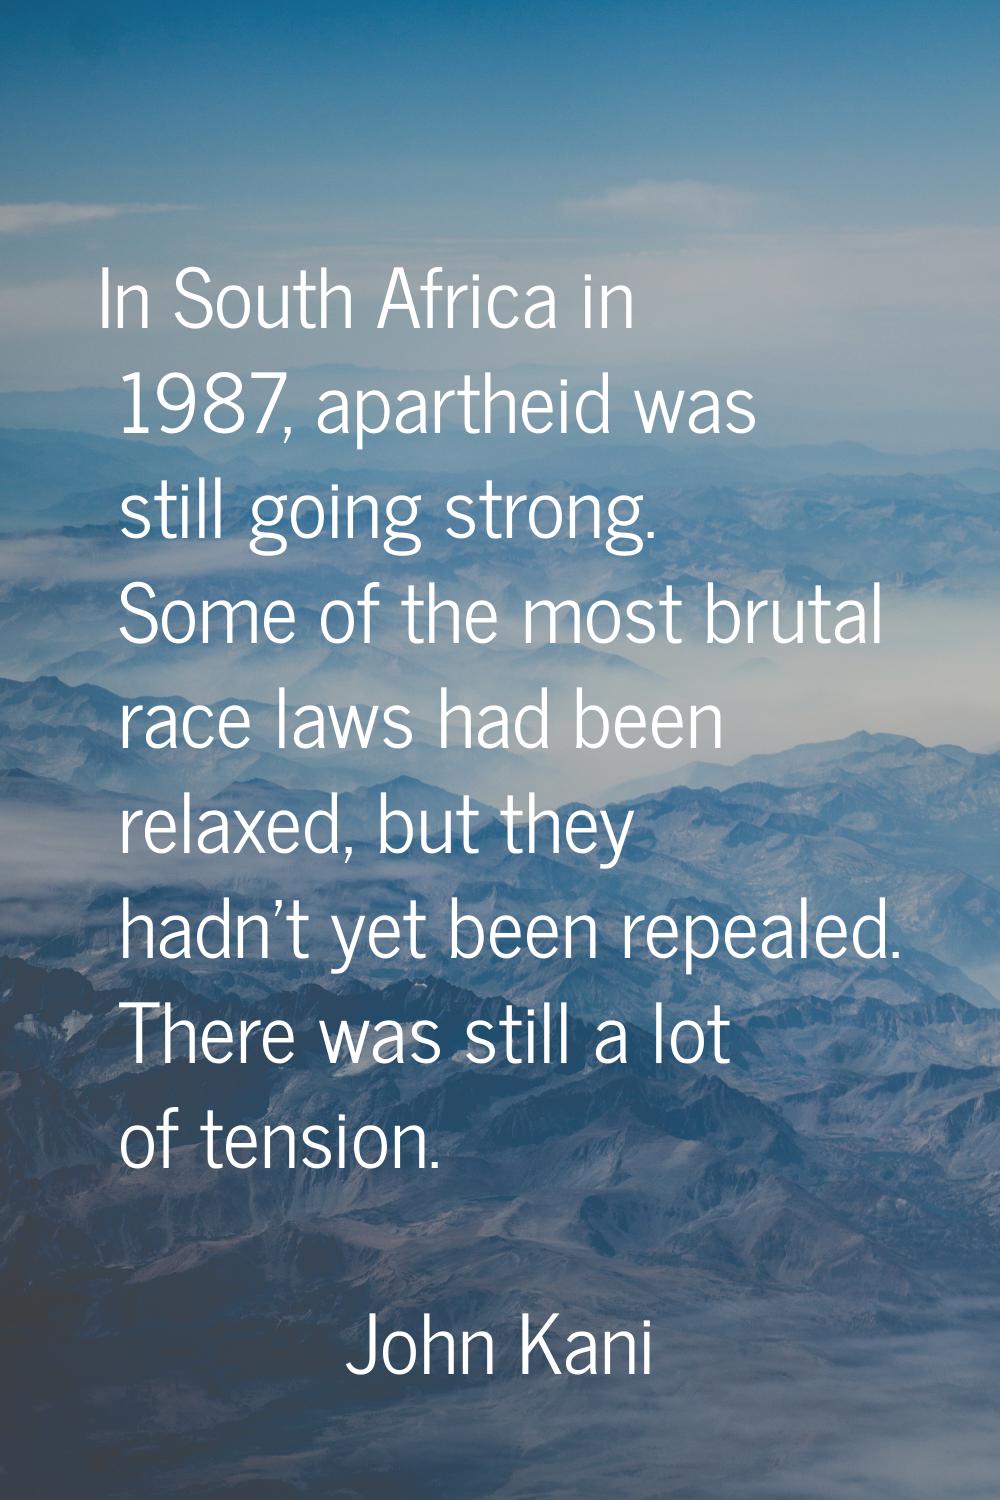 In South Africa in 1987, apartheid was still going strong. Some of the most brutal race laws had be